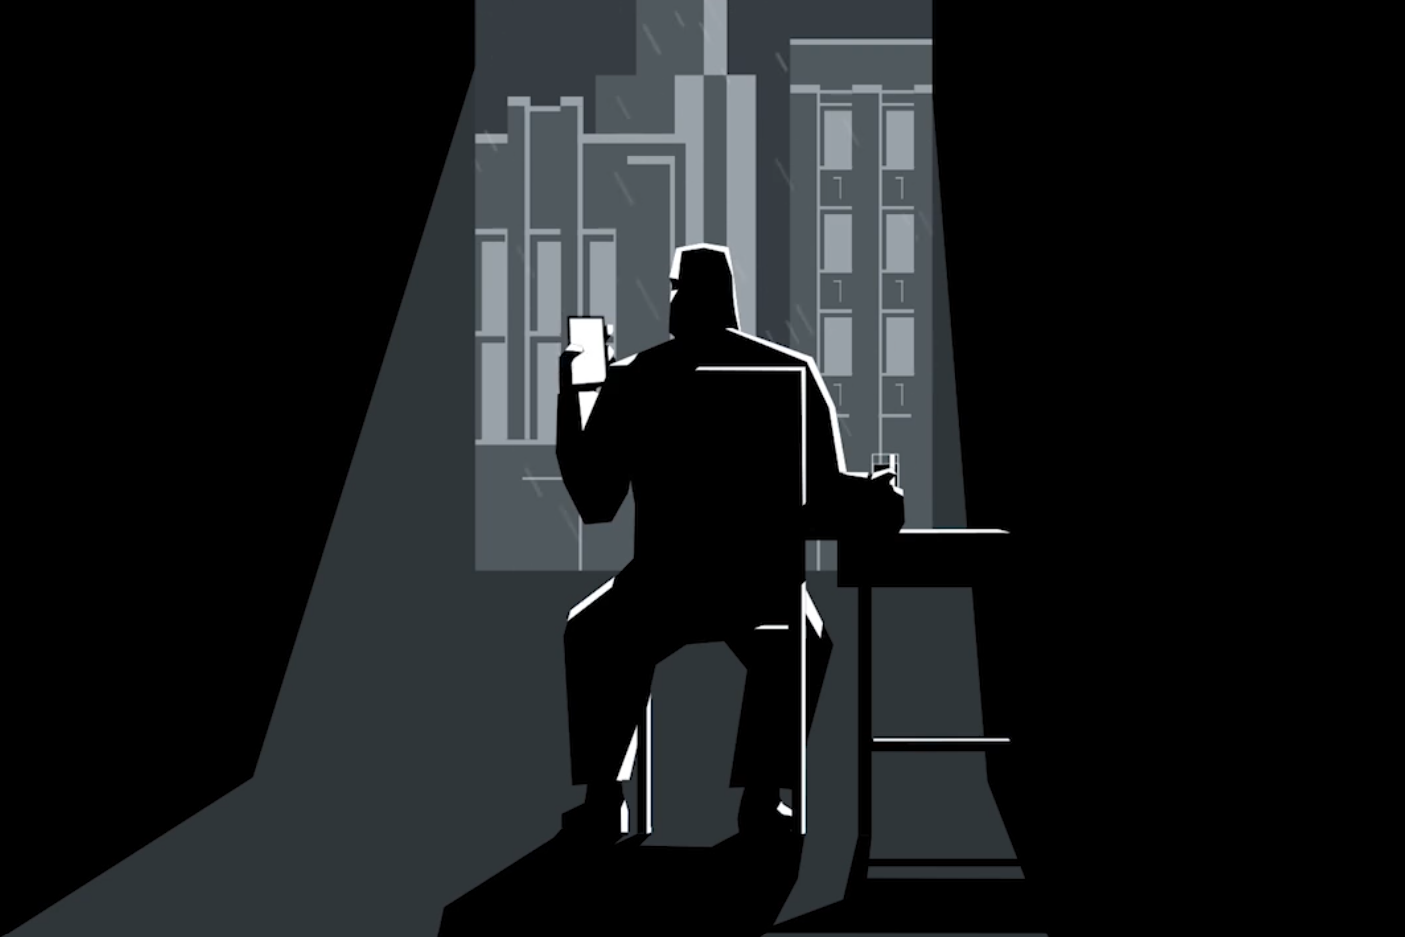 flat design illustration of a man sitting in a dark room in front of window looking at mobile device and a glass with liquid